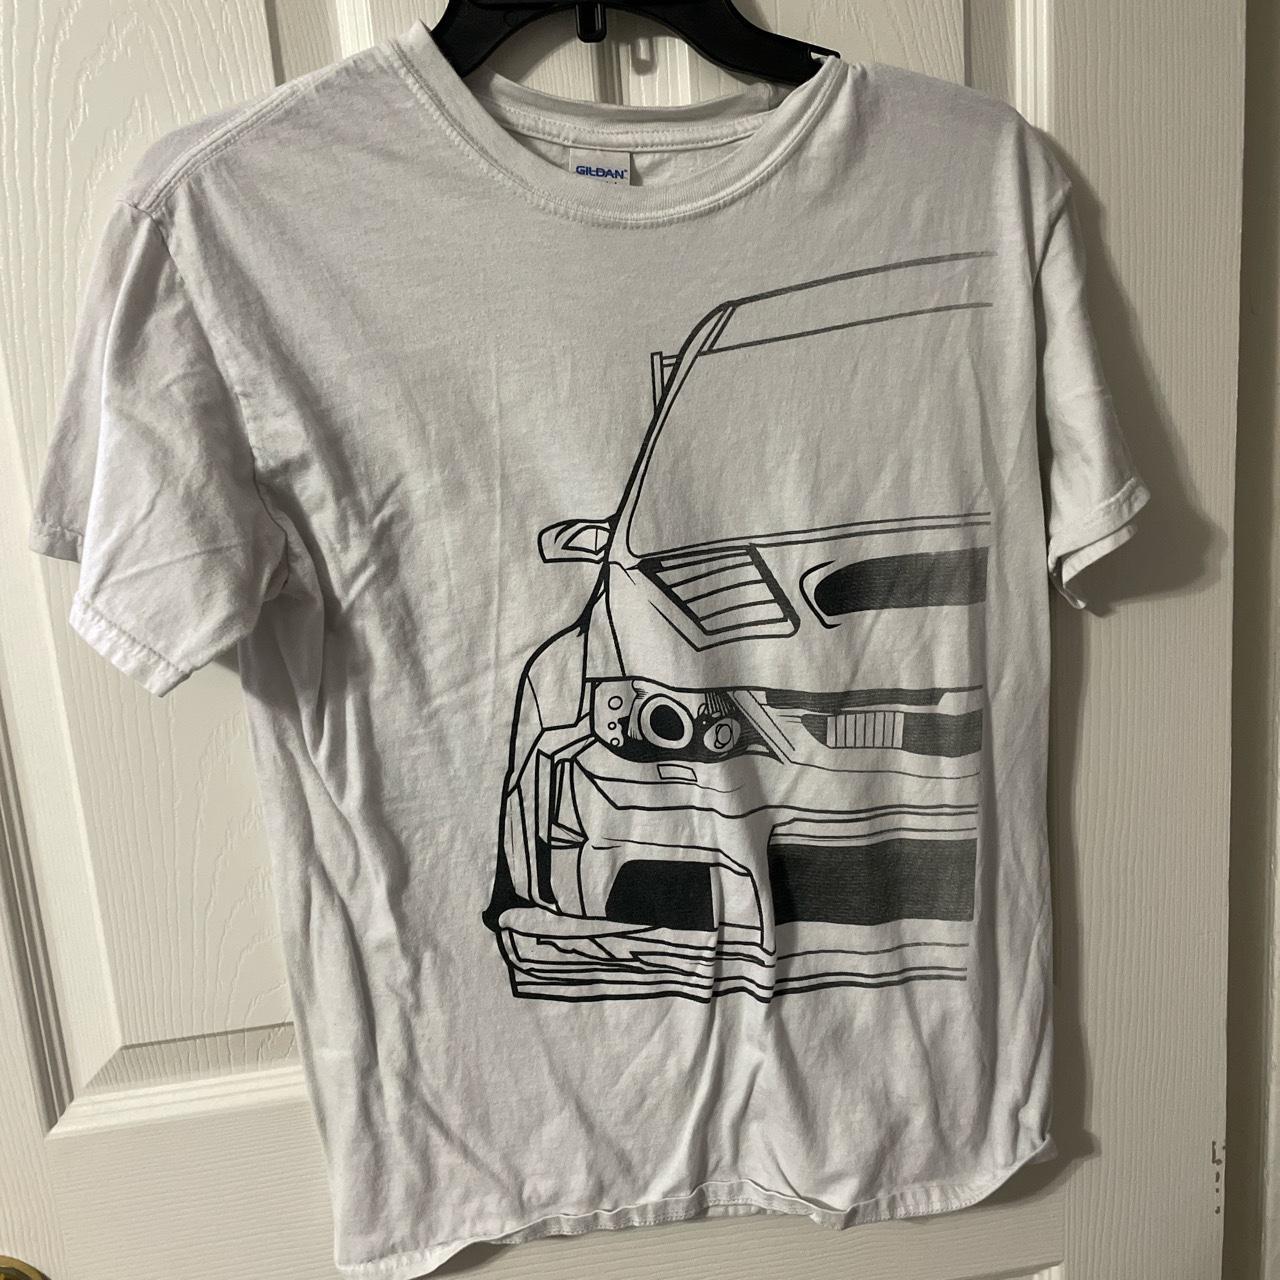 Pre-owned White Cotton T-shirt